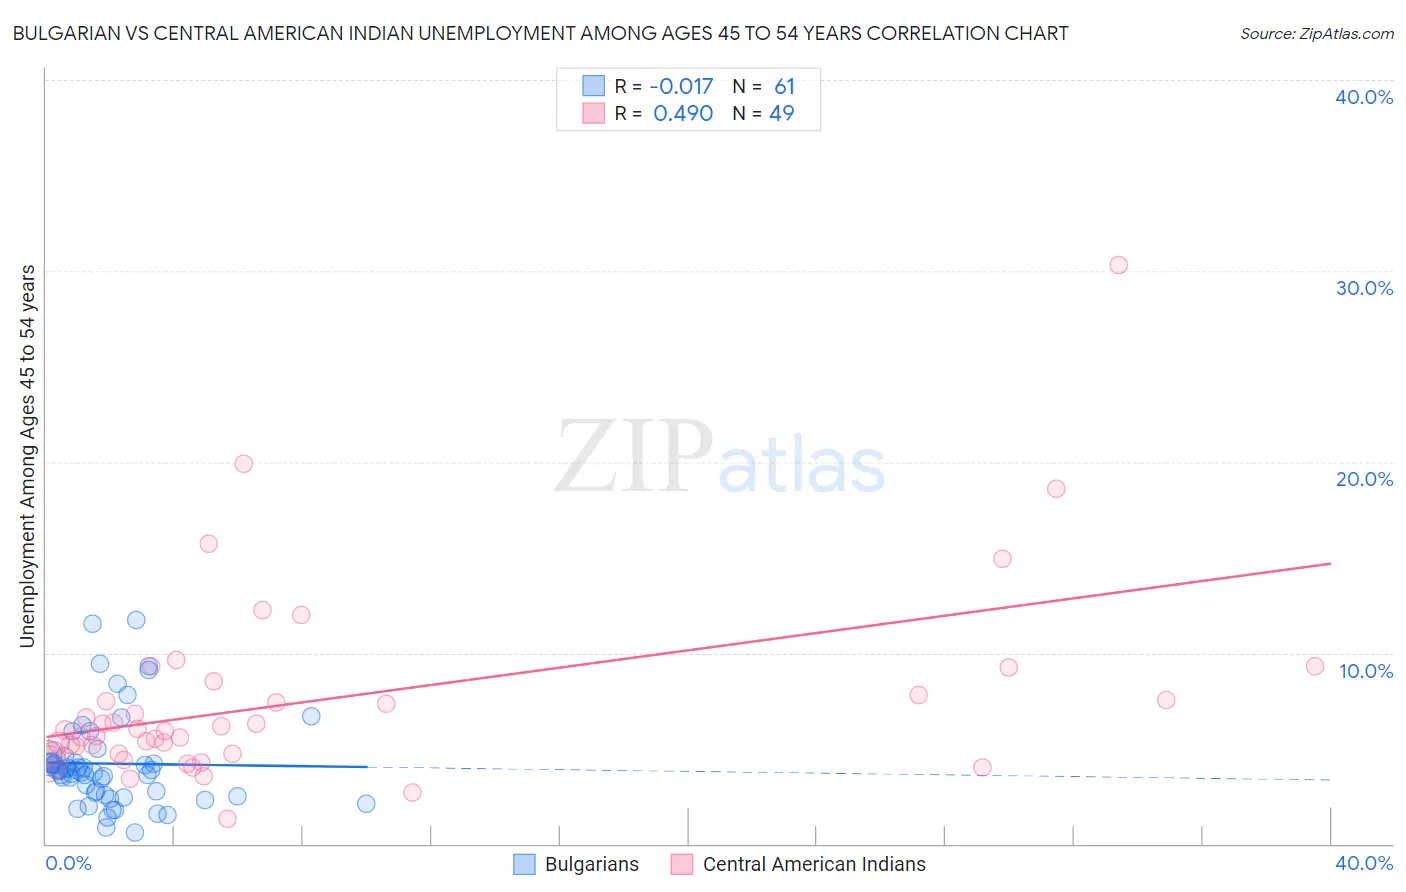 Bulgarian vs Central American Indian Unemployment Among Ages 45 to 54 years